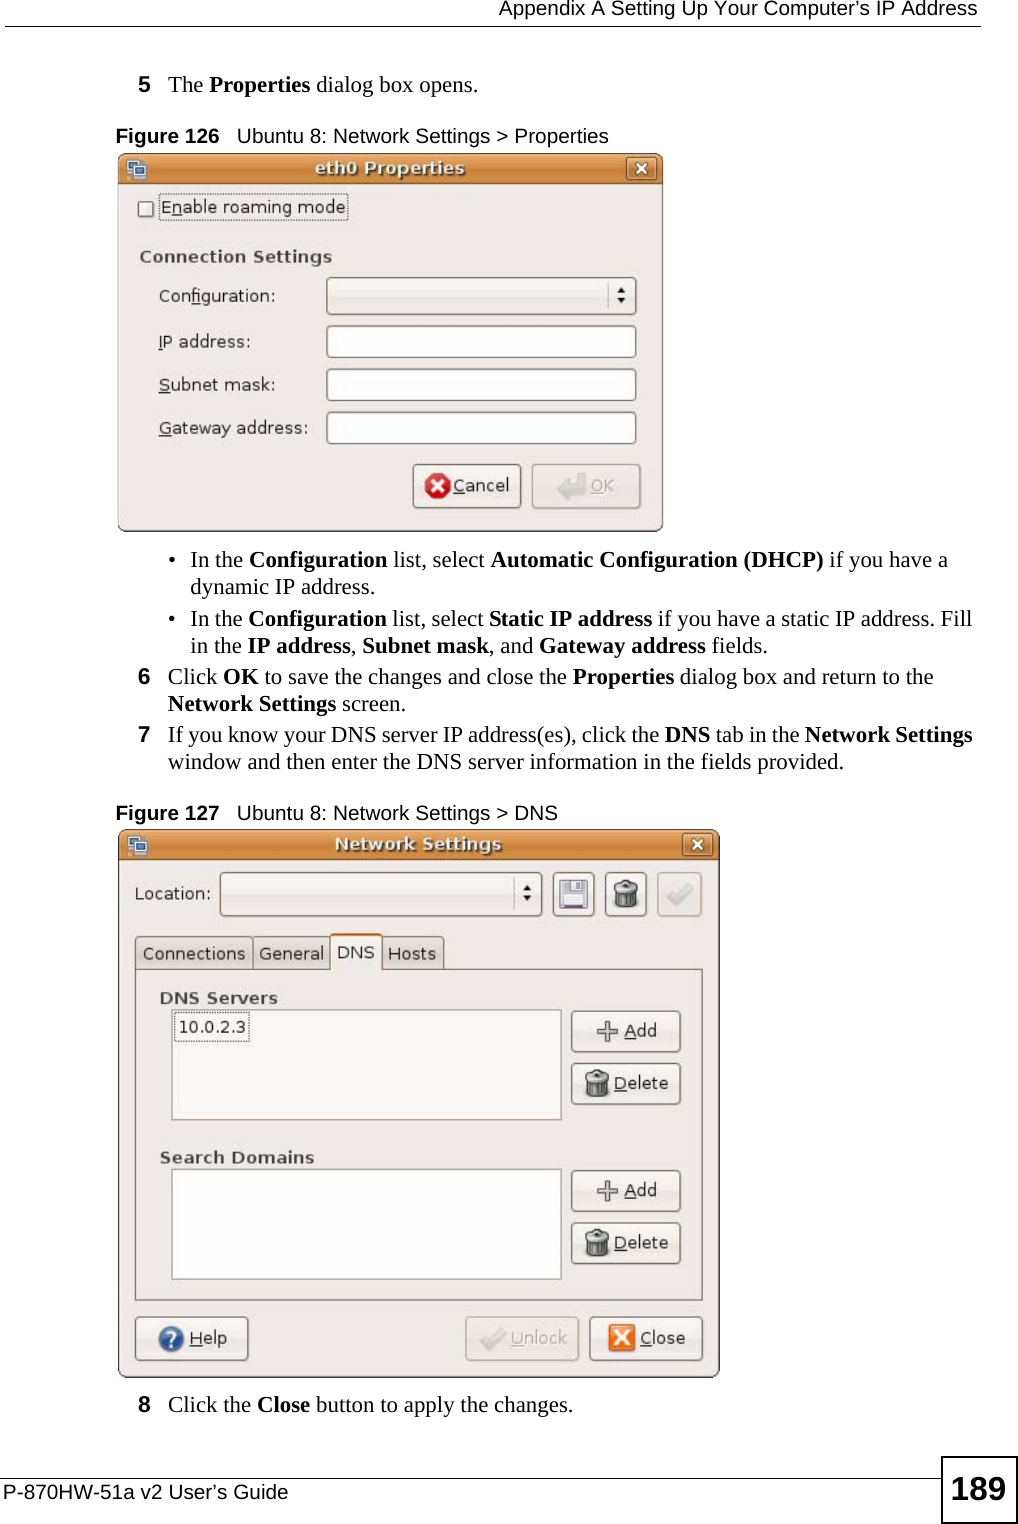  Appendix A Setting Up Your Computer’s IP AddressP-870HW-51a v2 User’s Guide 1895The Properties dialog box opens.Figure 126   Ubuntu 8: Network Settings &gt; Properties•In the Configuration list, select Automatic Configuration (DHCP) if you have a dynamic IP address.•In the Configuration list, select Static IP address if you have a static IP address. Fill in the IP address, Subnet mask, and Gateway address fields. 6Click OK to save the changes and close the Properties dialog box and return to the Network Settings screen. 7If you know your DNS server IP address(es), click the DNS tab in the Network Settings window and then enter the DNS server information in the fields provided. Figure 127   Ubuntu 8: Network Settings &gt; DNS  8Click the Close button to apply the changes.